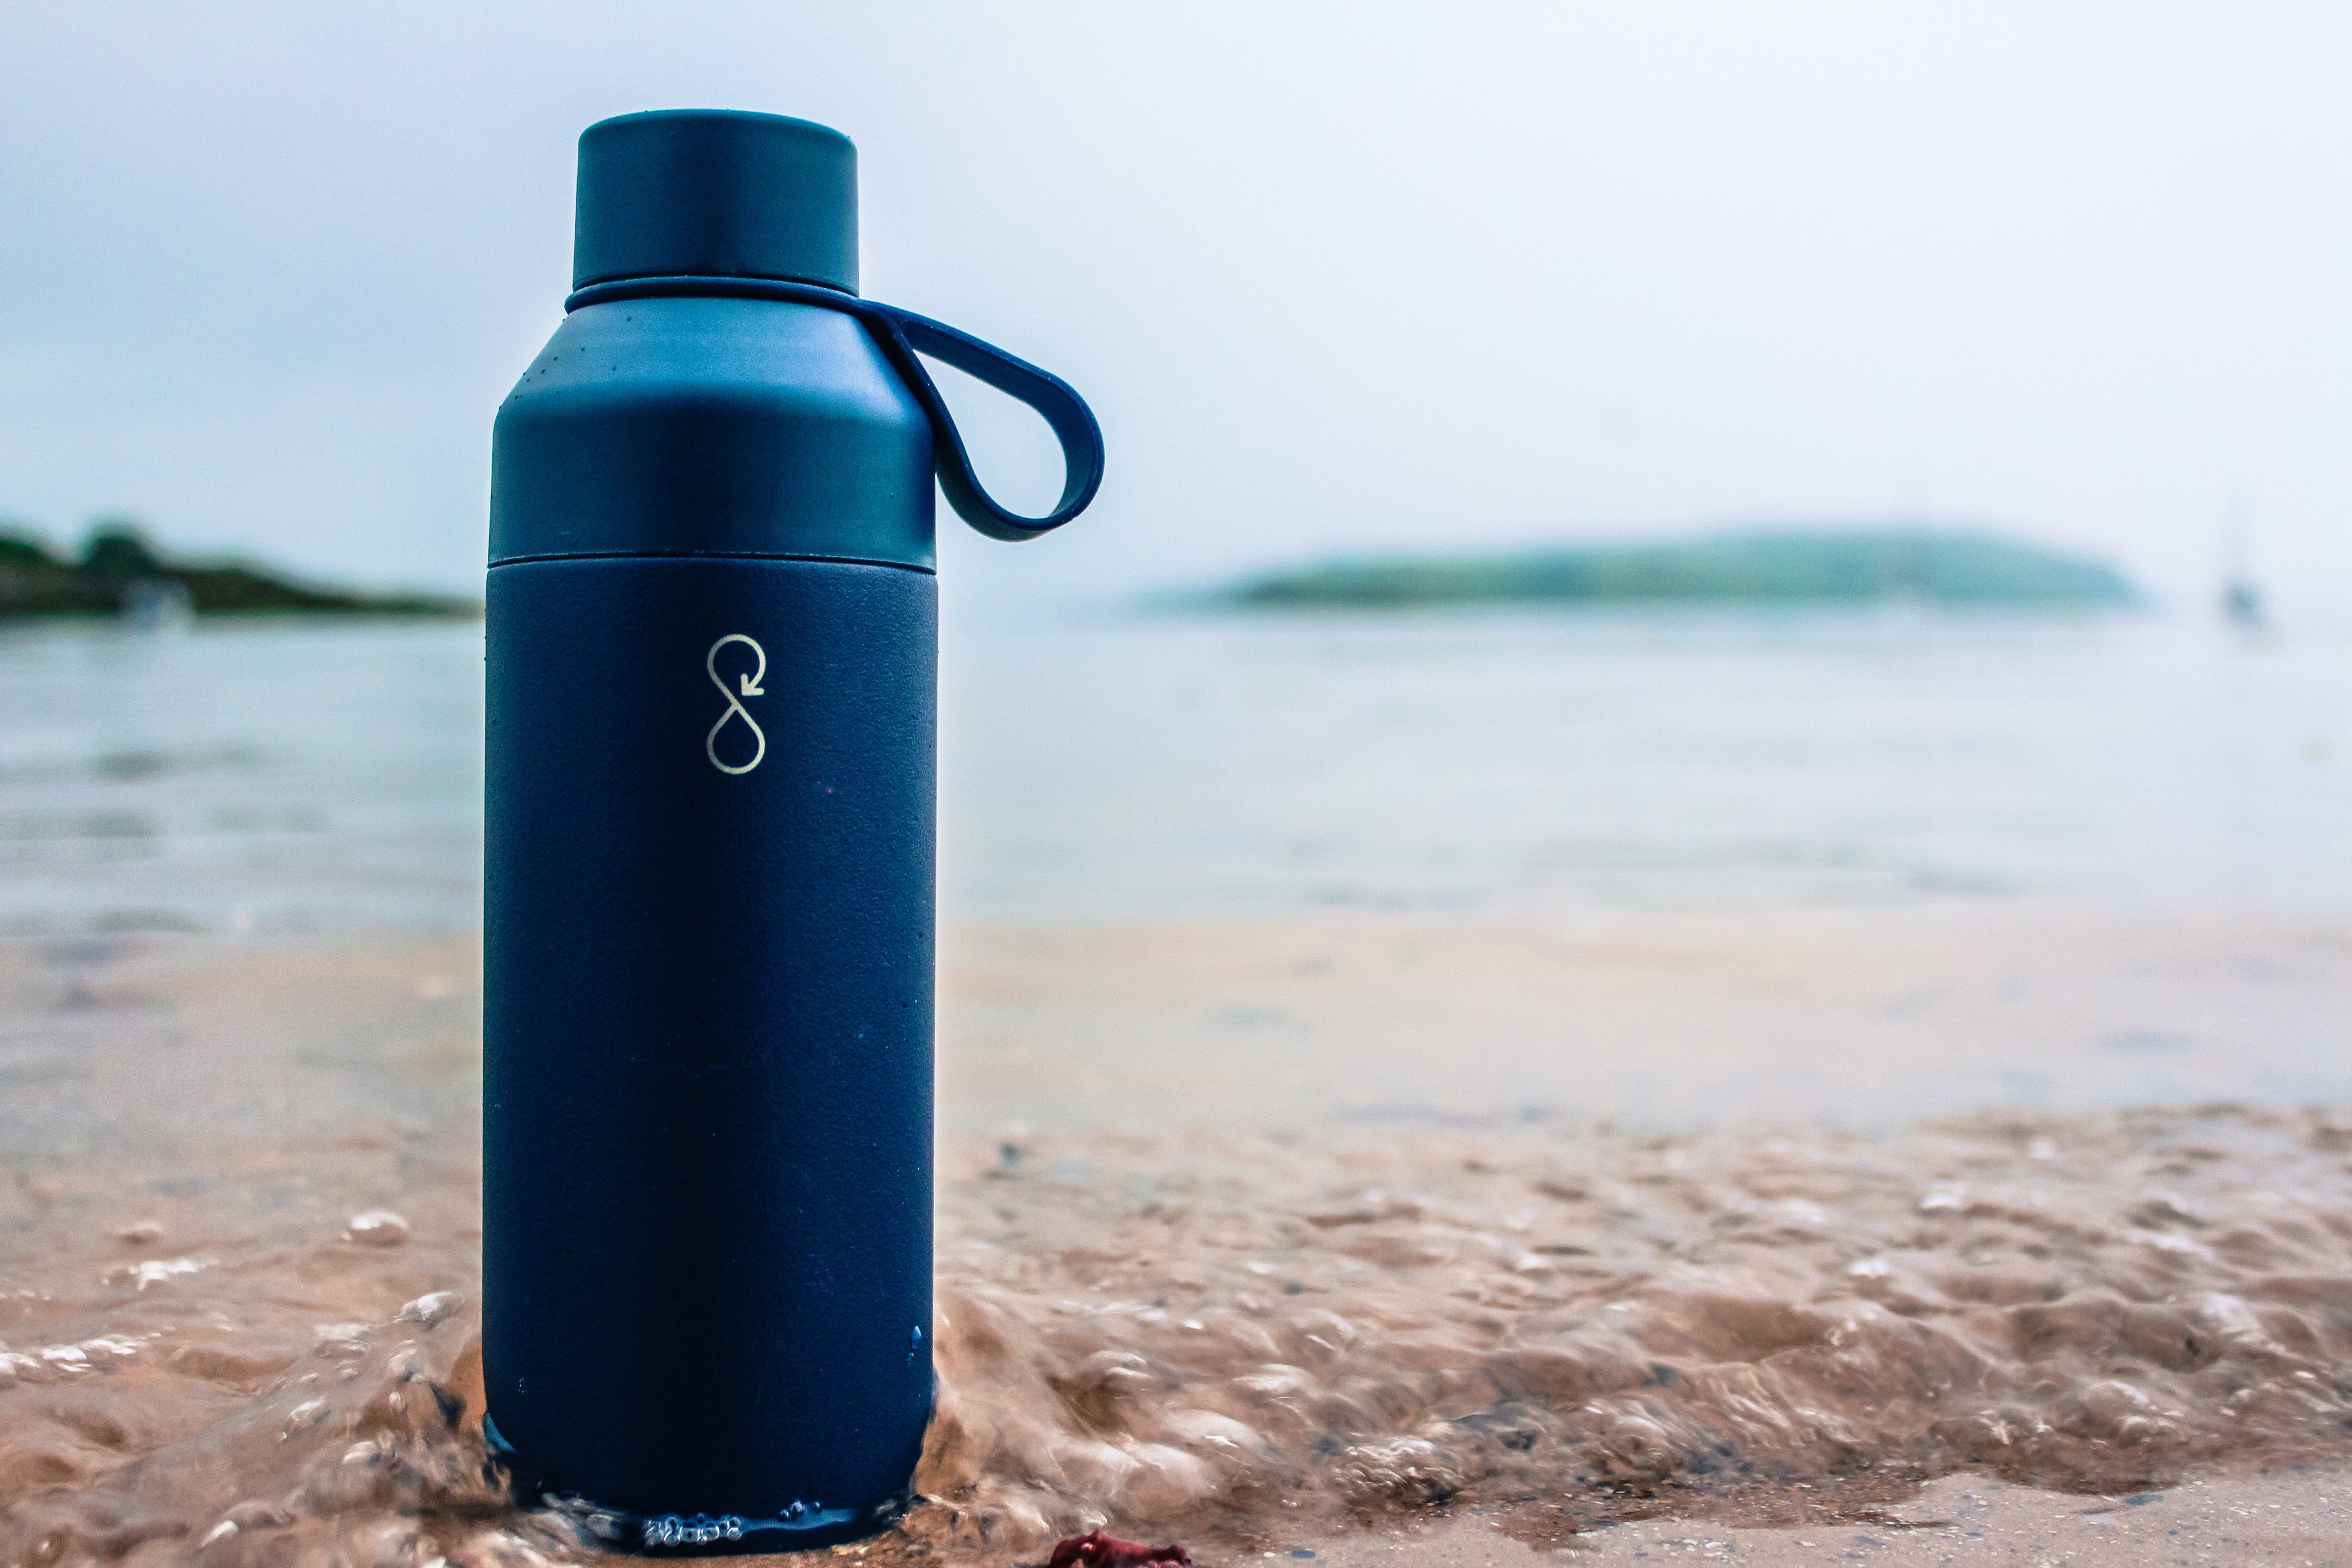 Water of life: a reusable bottle that also cancels out the non-reusable ones